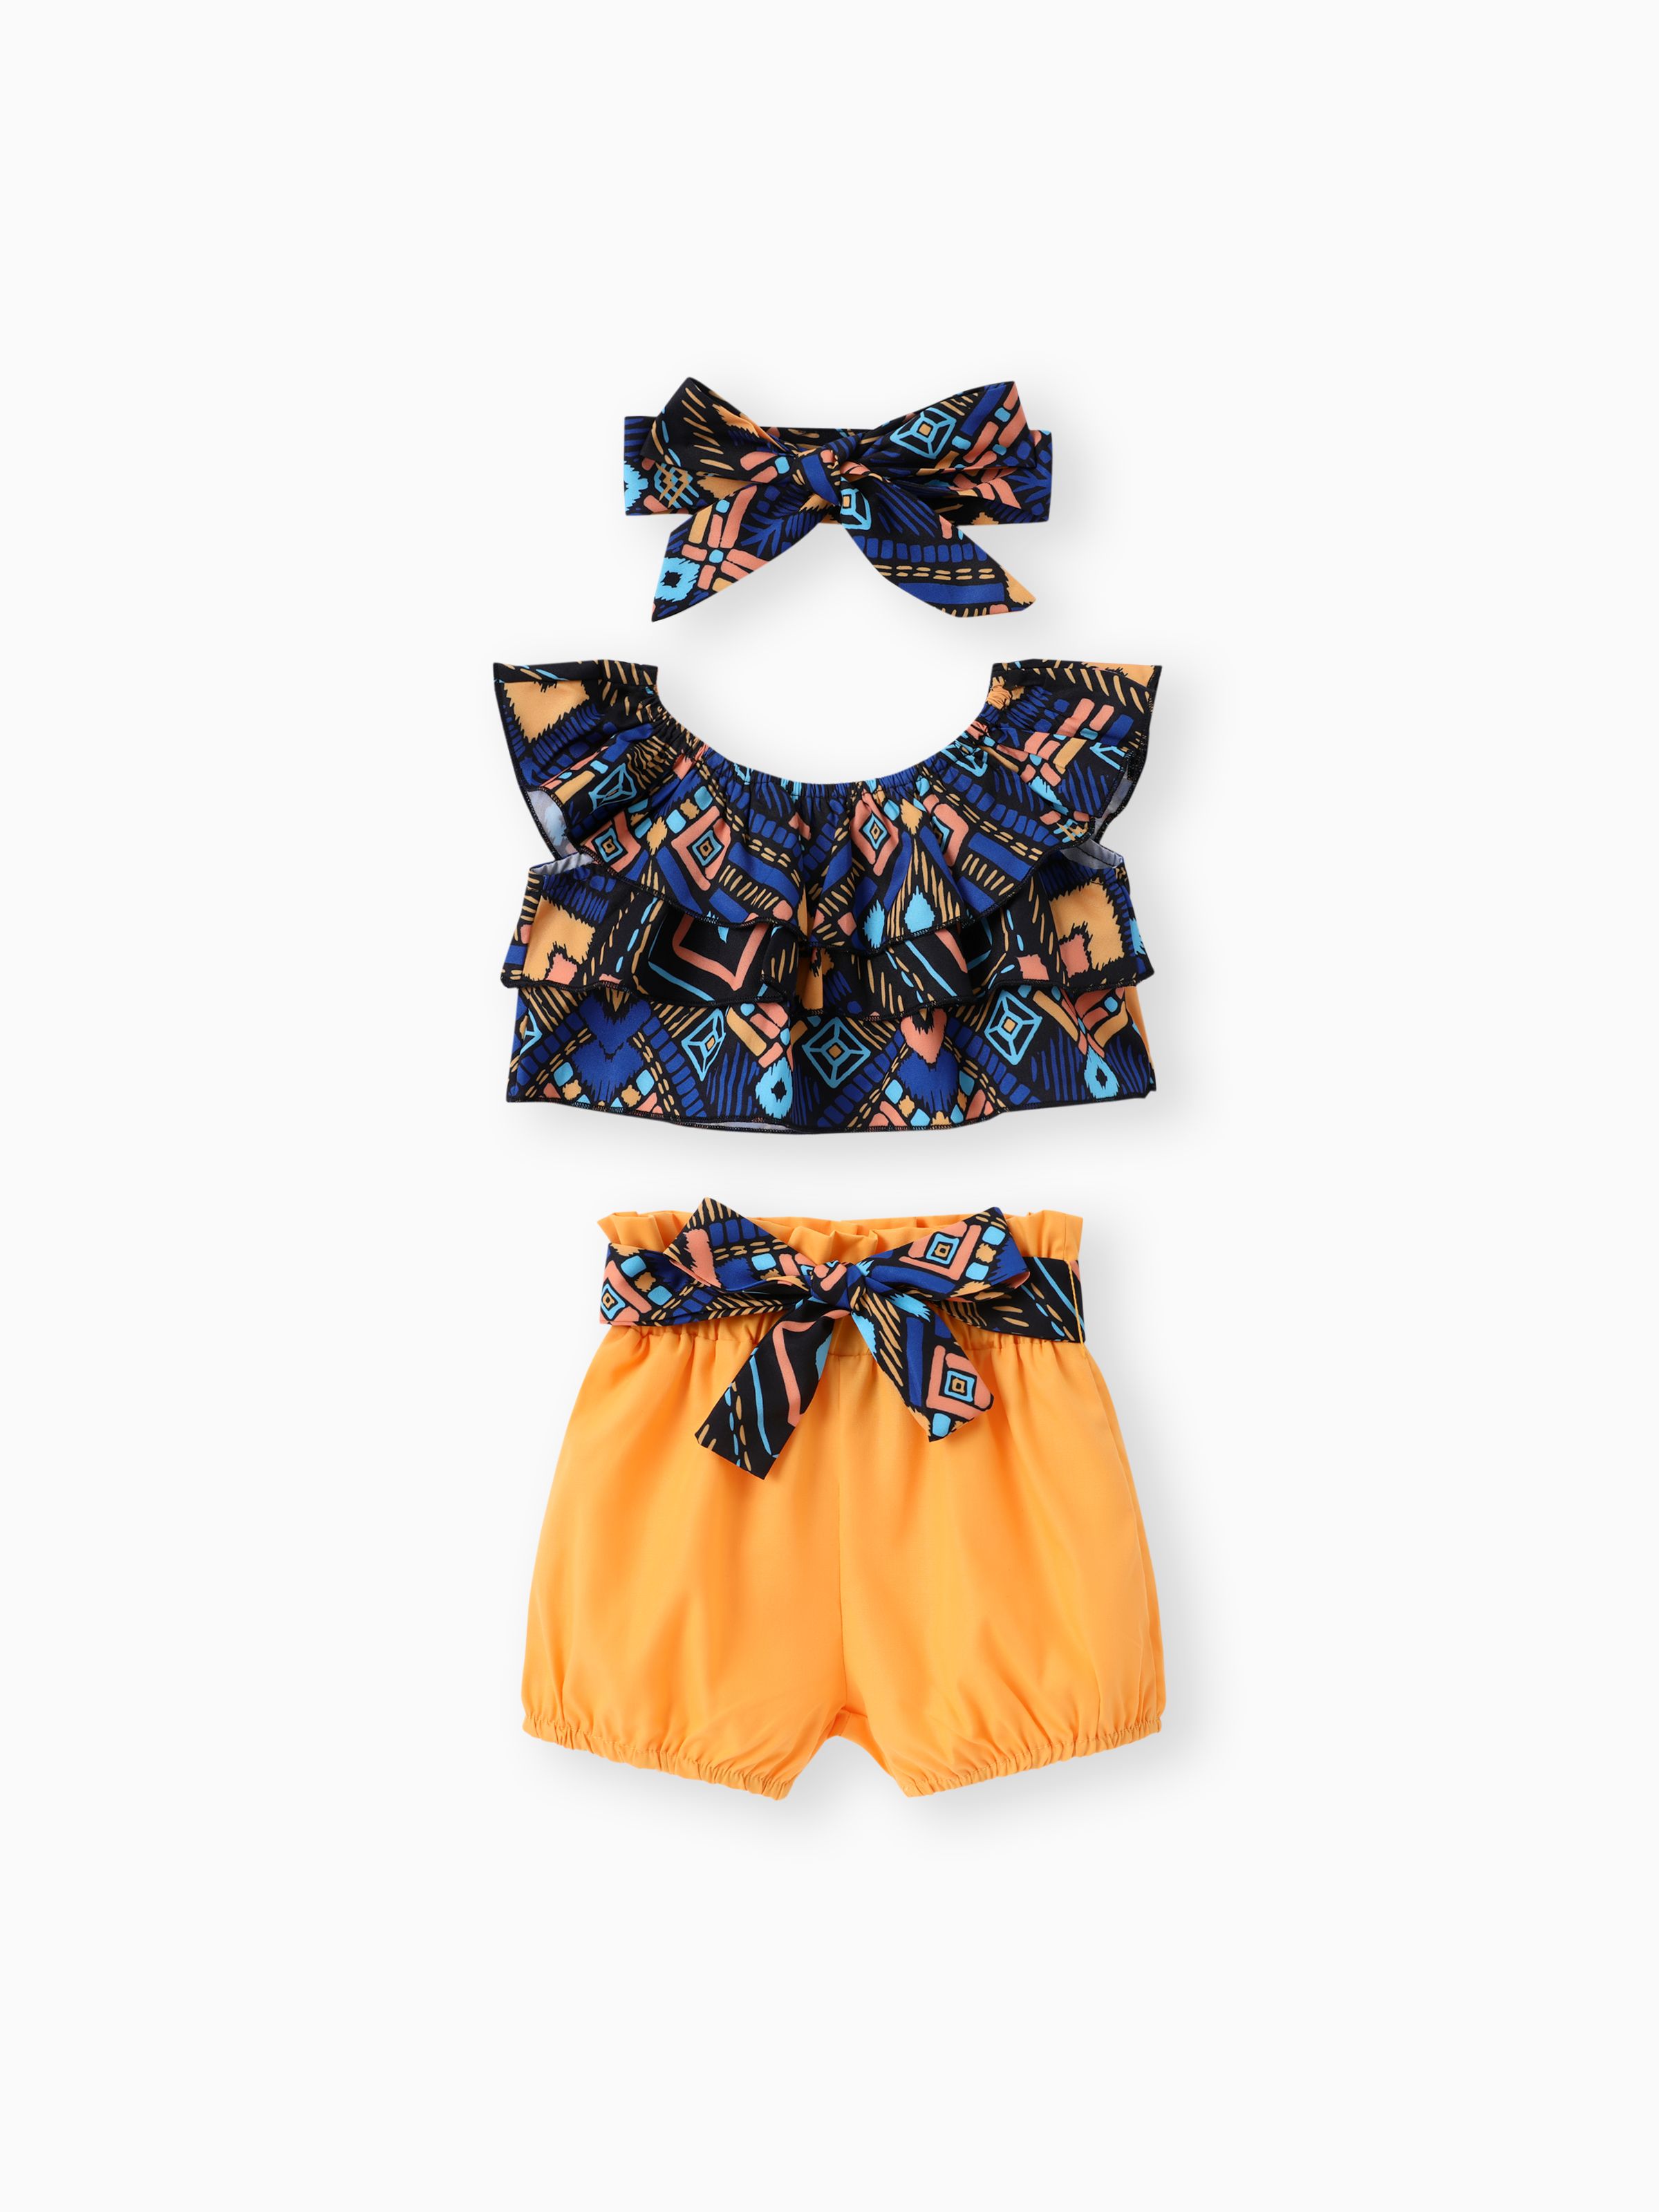 

Sweet 4pcs Baby Girl Set with Geometric Pattern and Ruffle Edge, Cotton and Polyester Blend